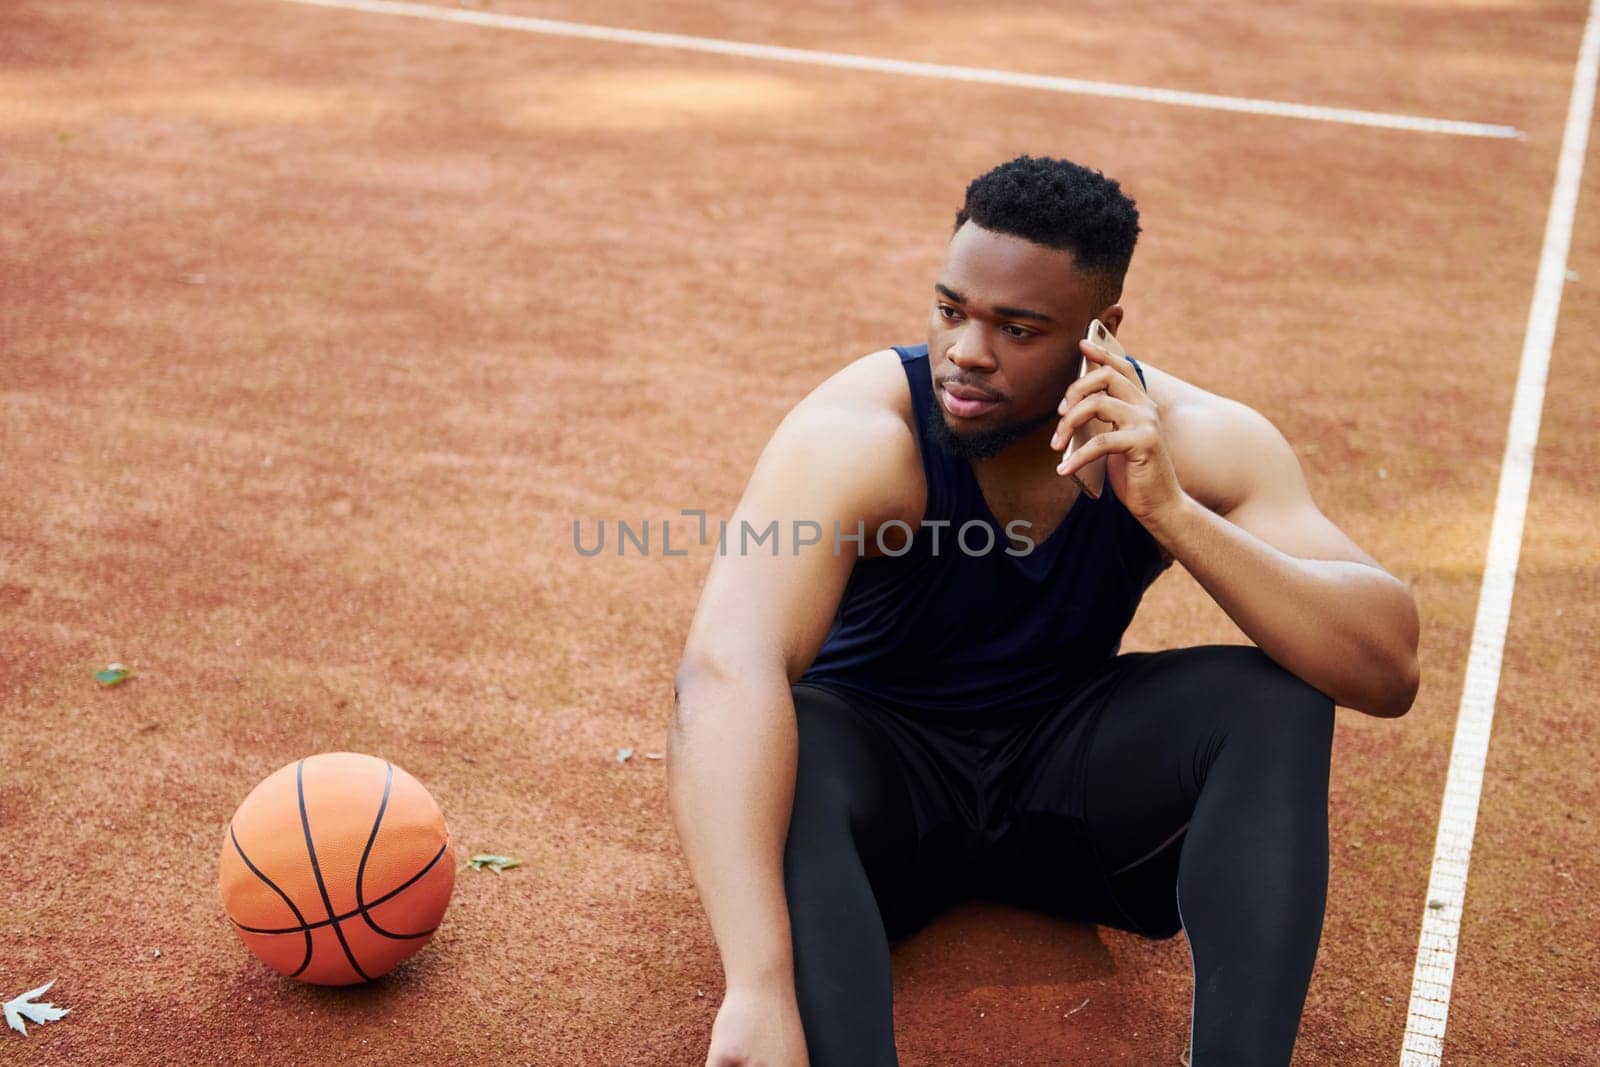 Talks by phone. African american man plays basketball on the court outdoors.